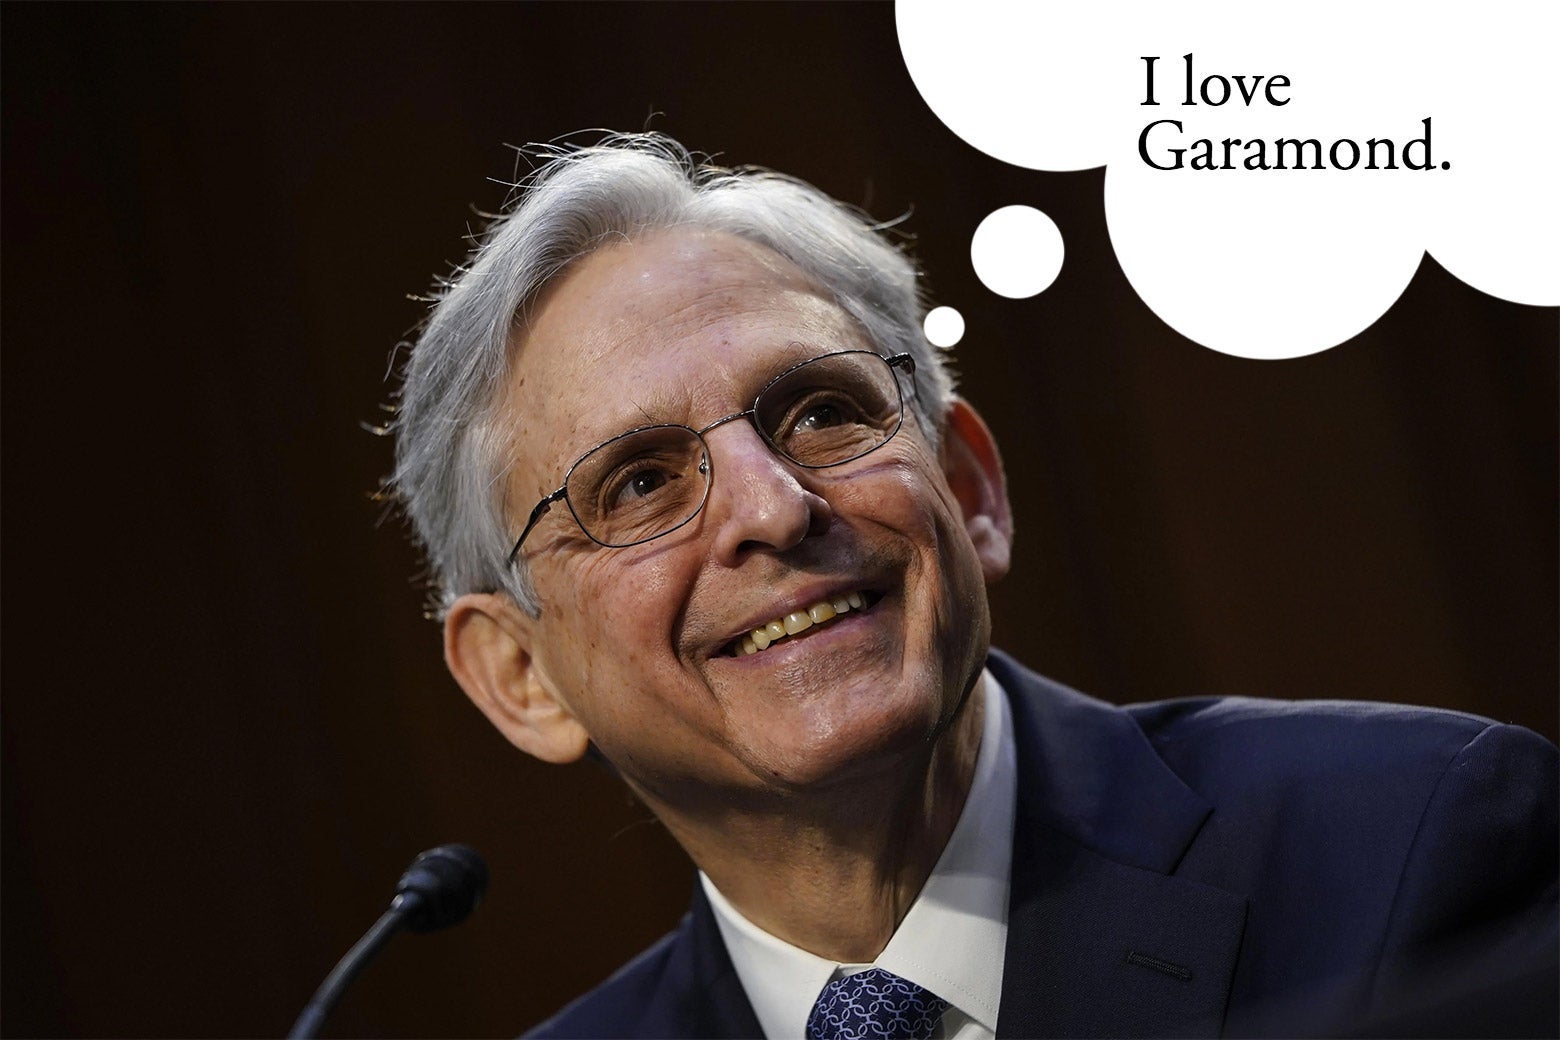 Merrick Garland smiling in front of a microphone